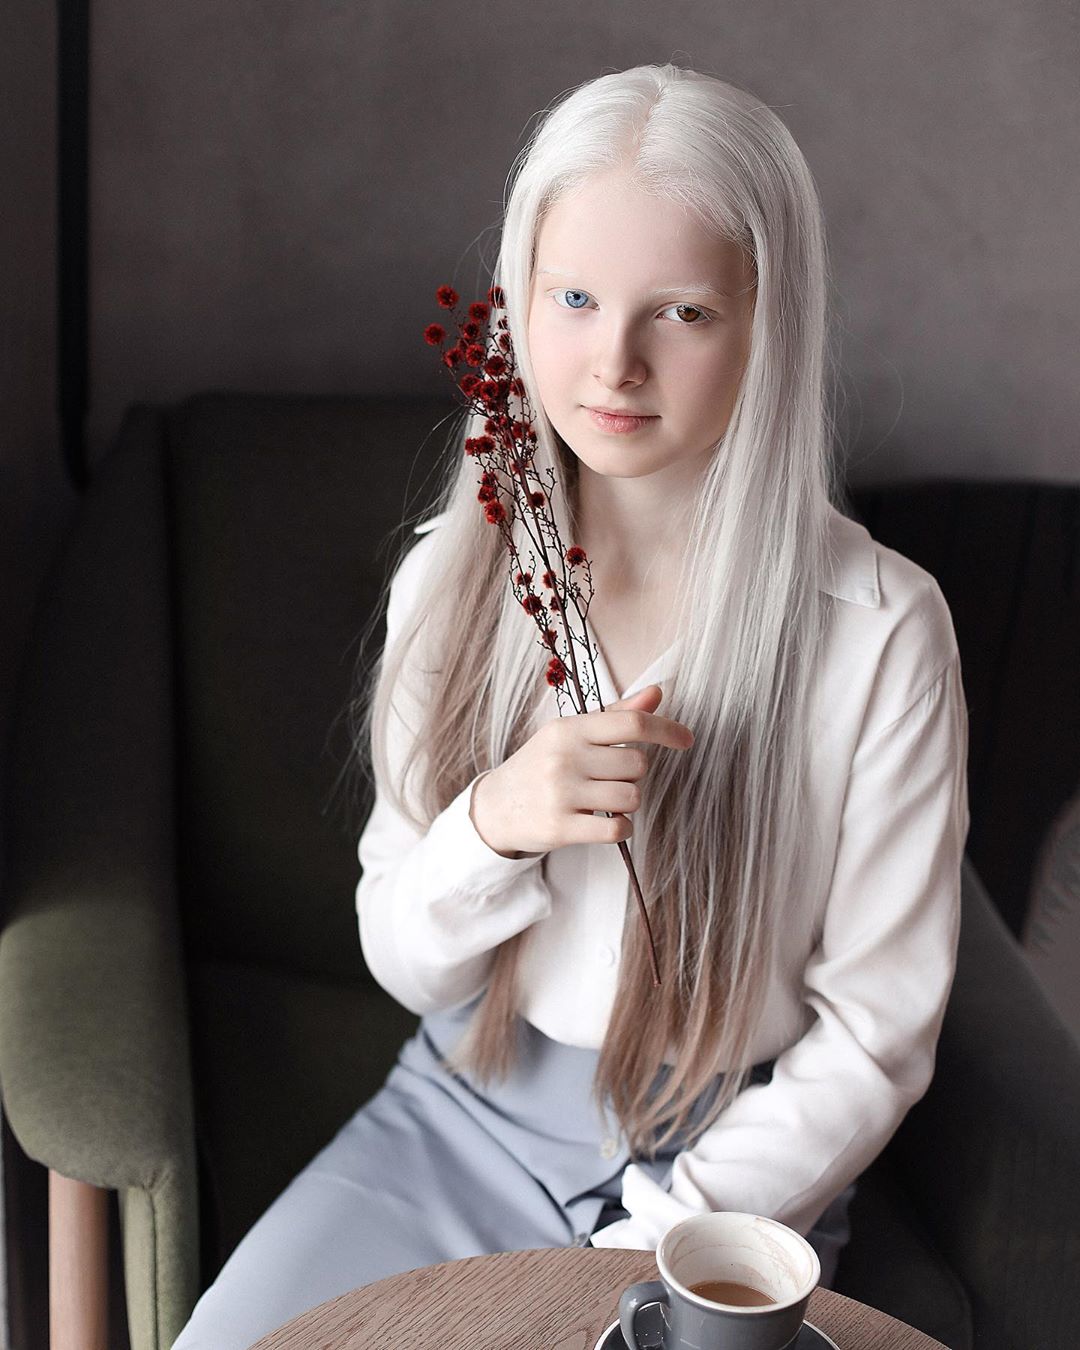 amina ependieva – a girl who inherited two genetic mutations and exceptional beauty